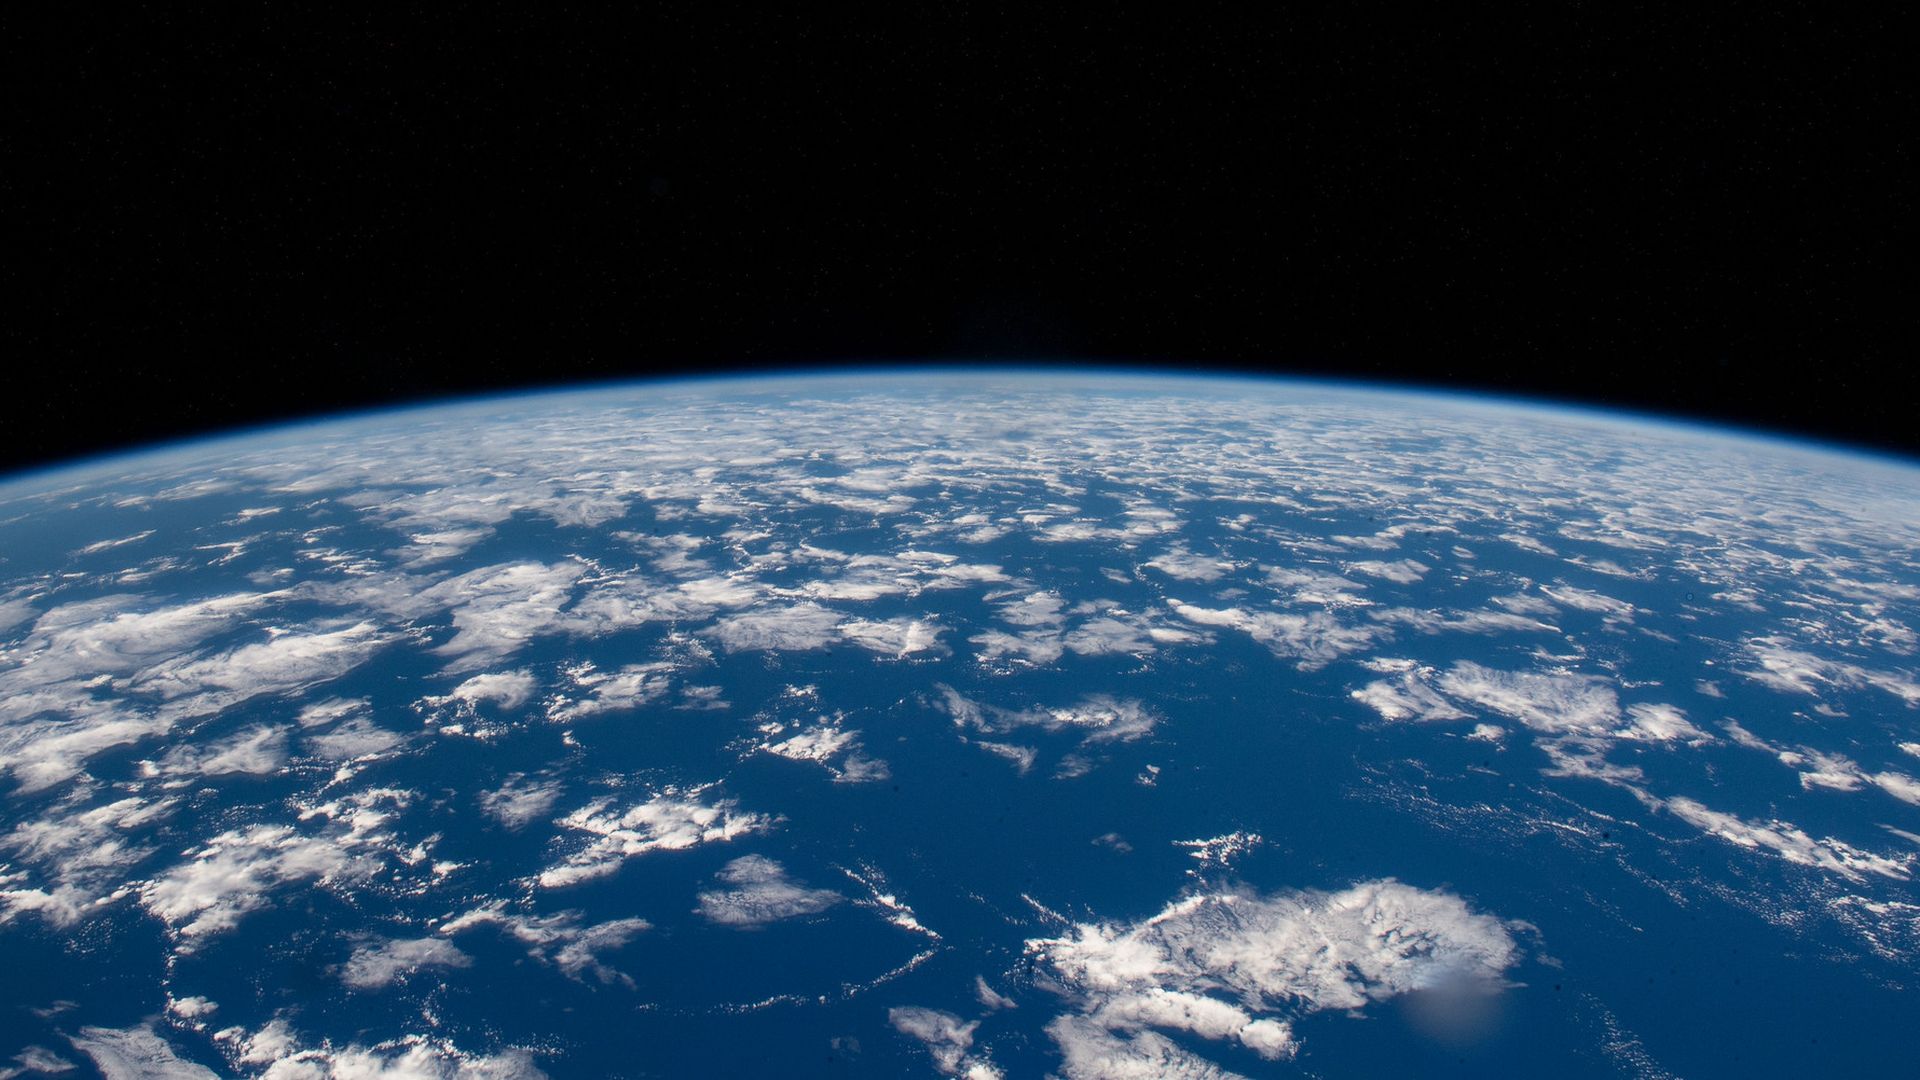 Earth's blue water with dappled clouds against the blackness of space.